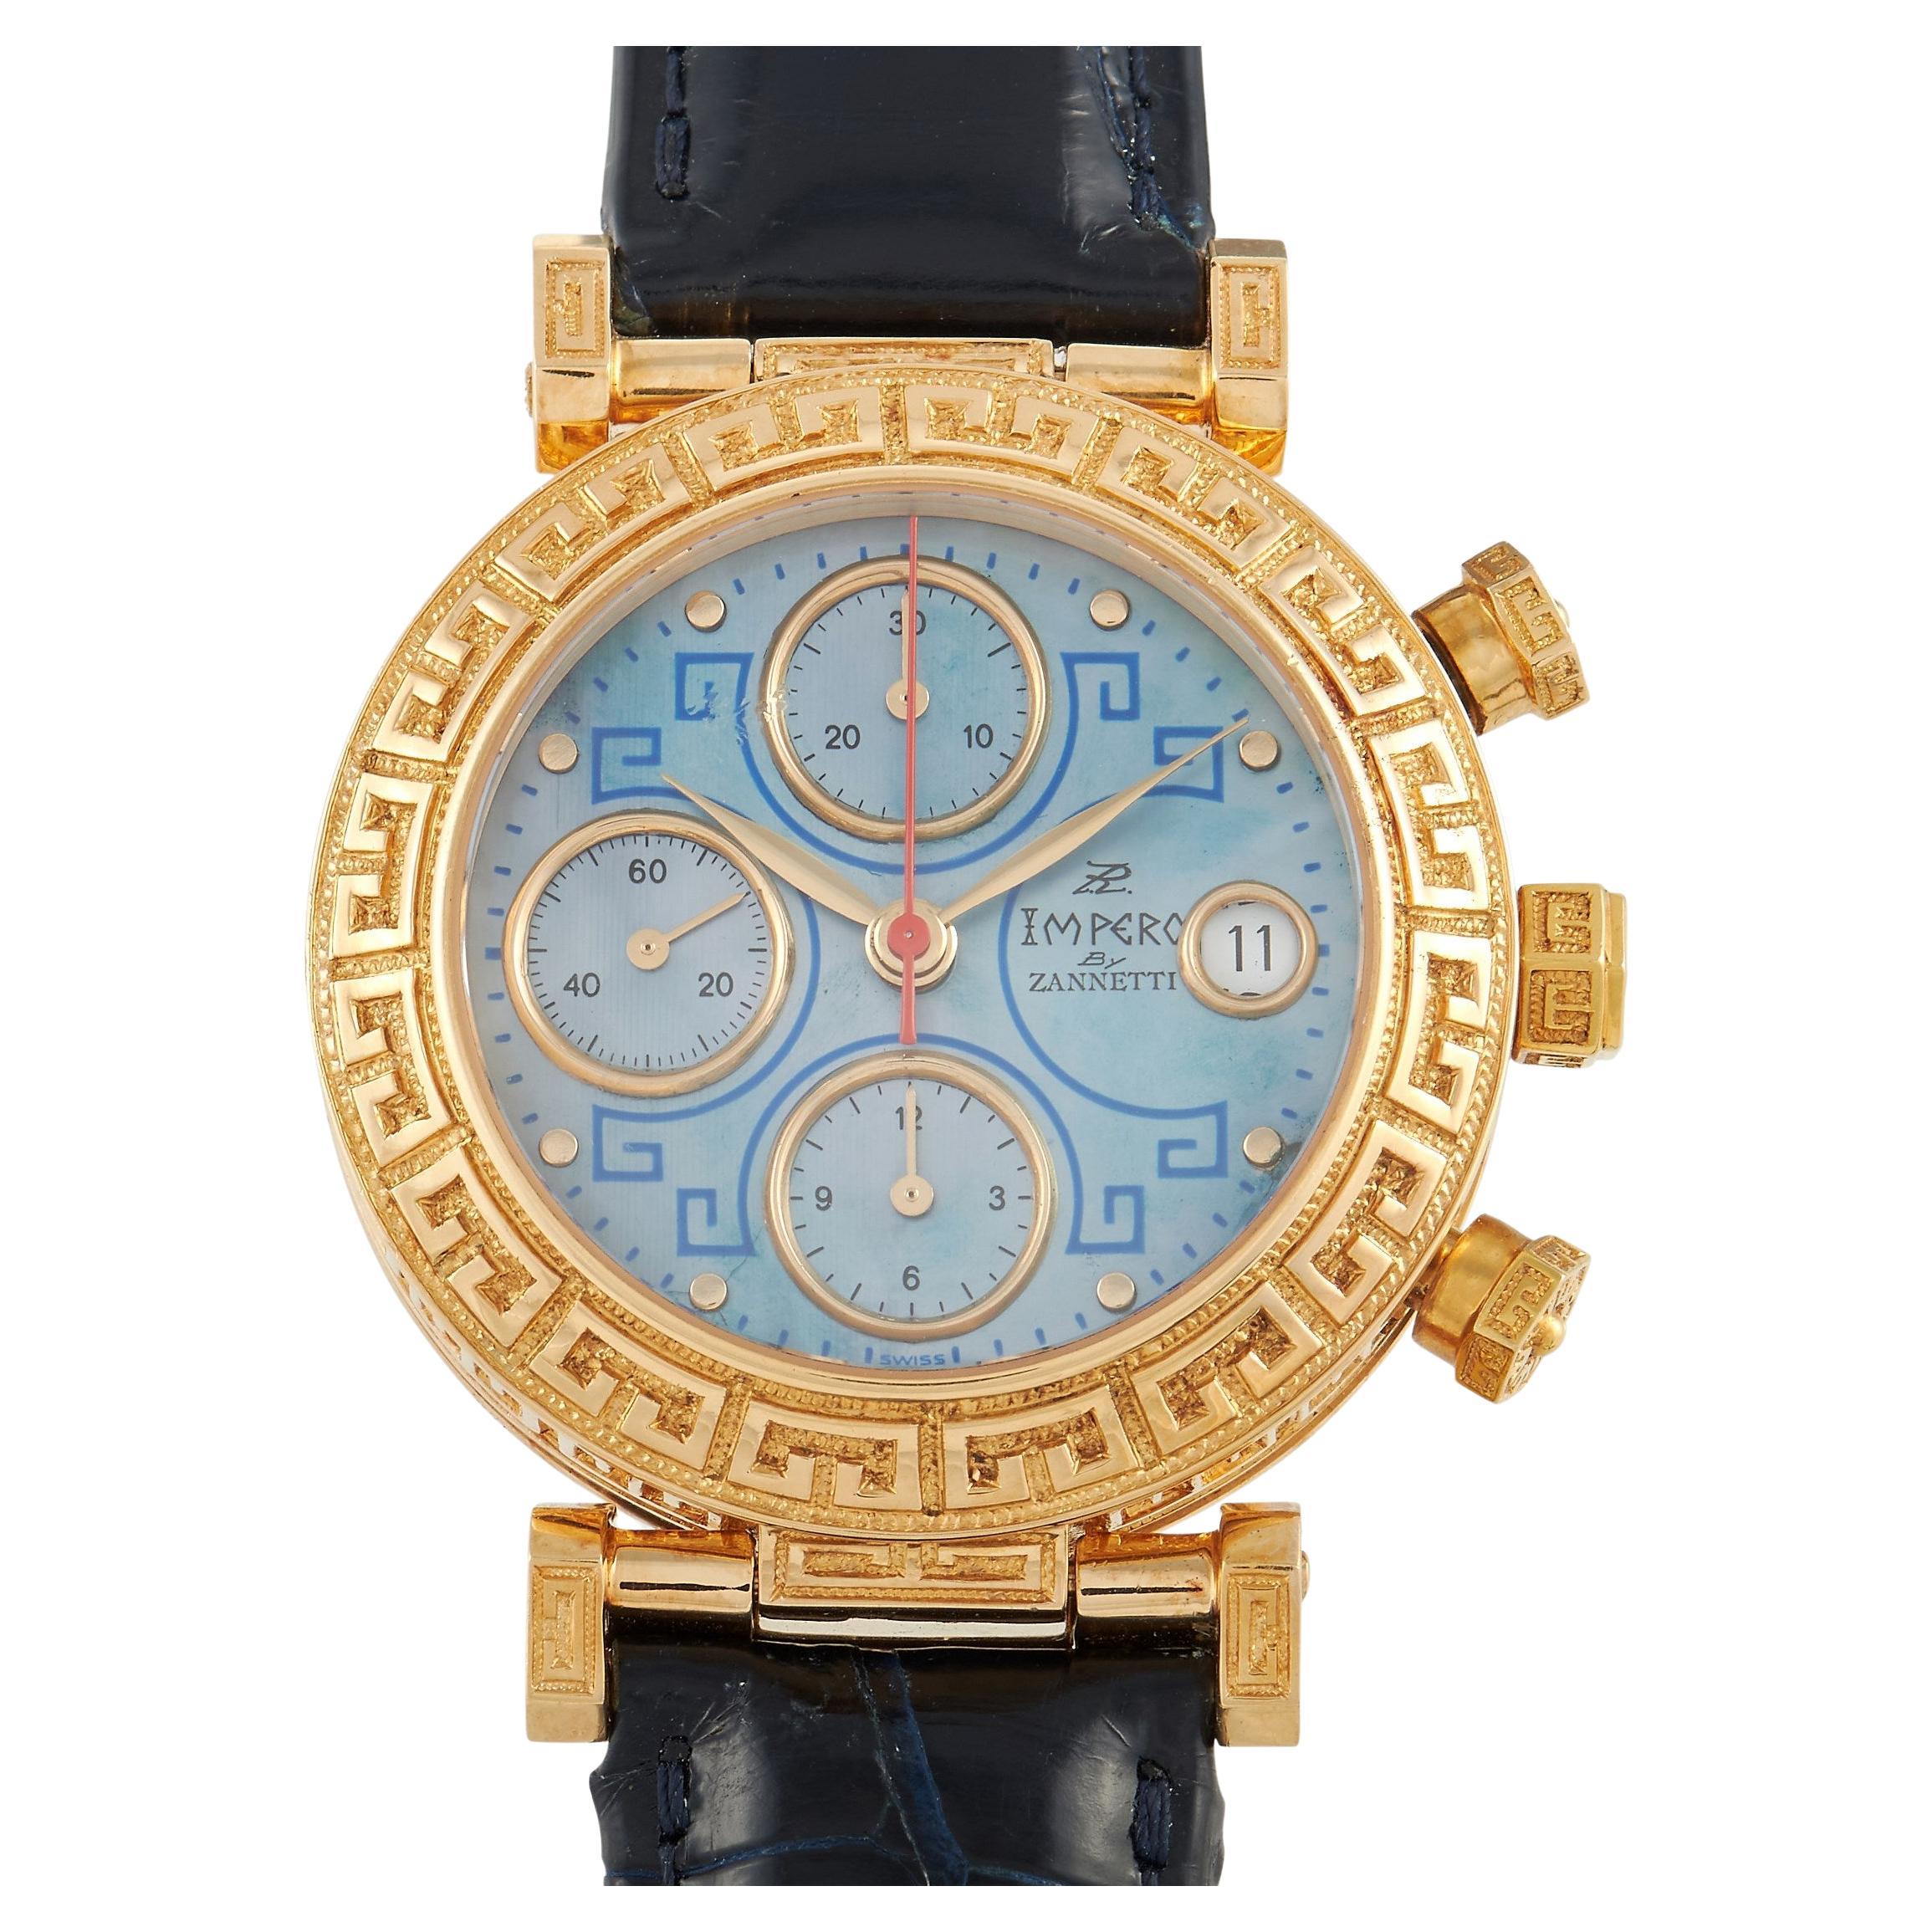 Zannetti Impero 18K Gold Chronograph Watch For Sale at 1stDibs